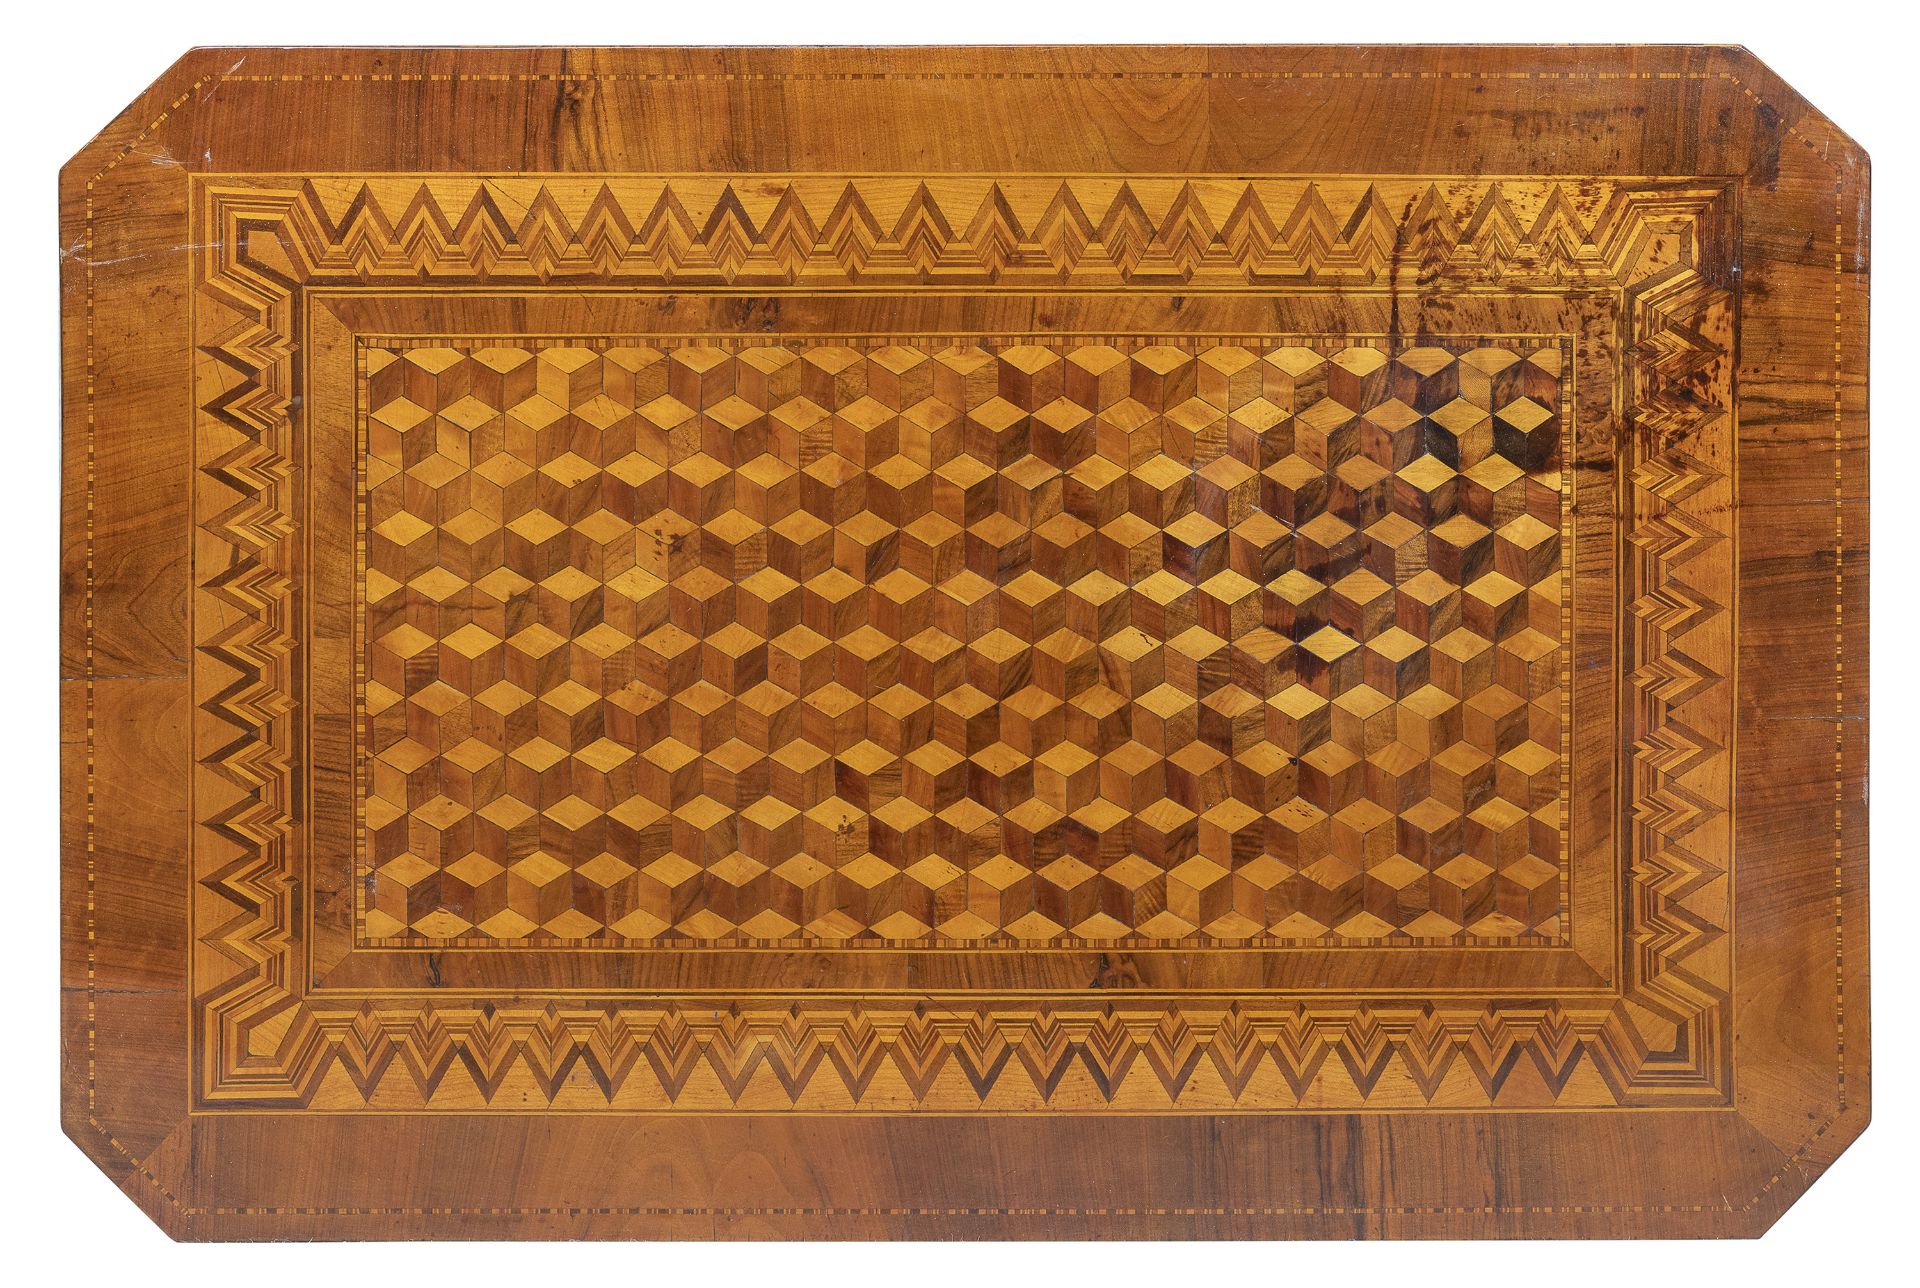 INLAID WALNUT TABLE PROBABLY SORRENTO 19th CENTURY - Image 2 of 2